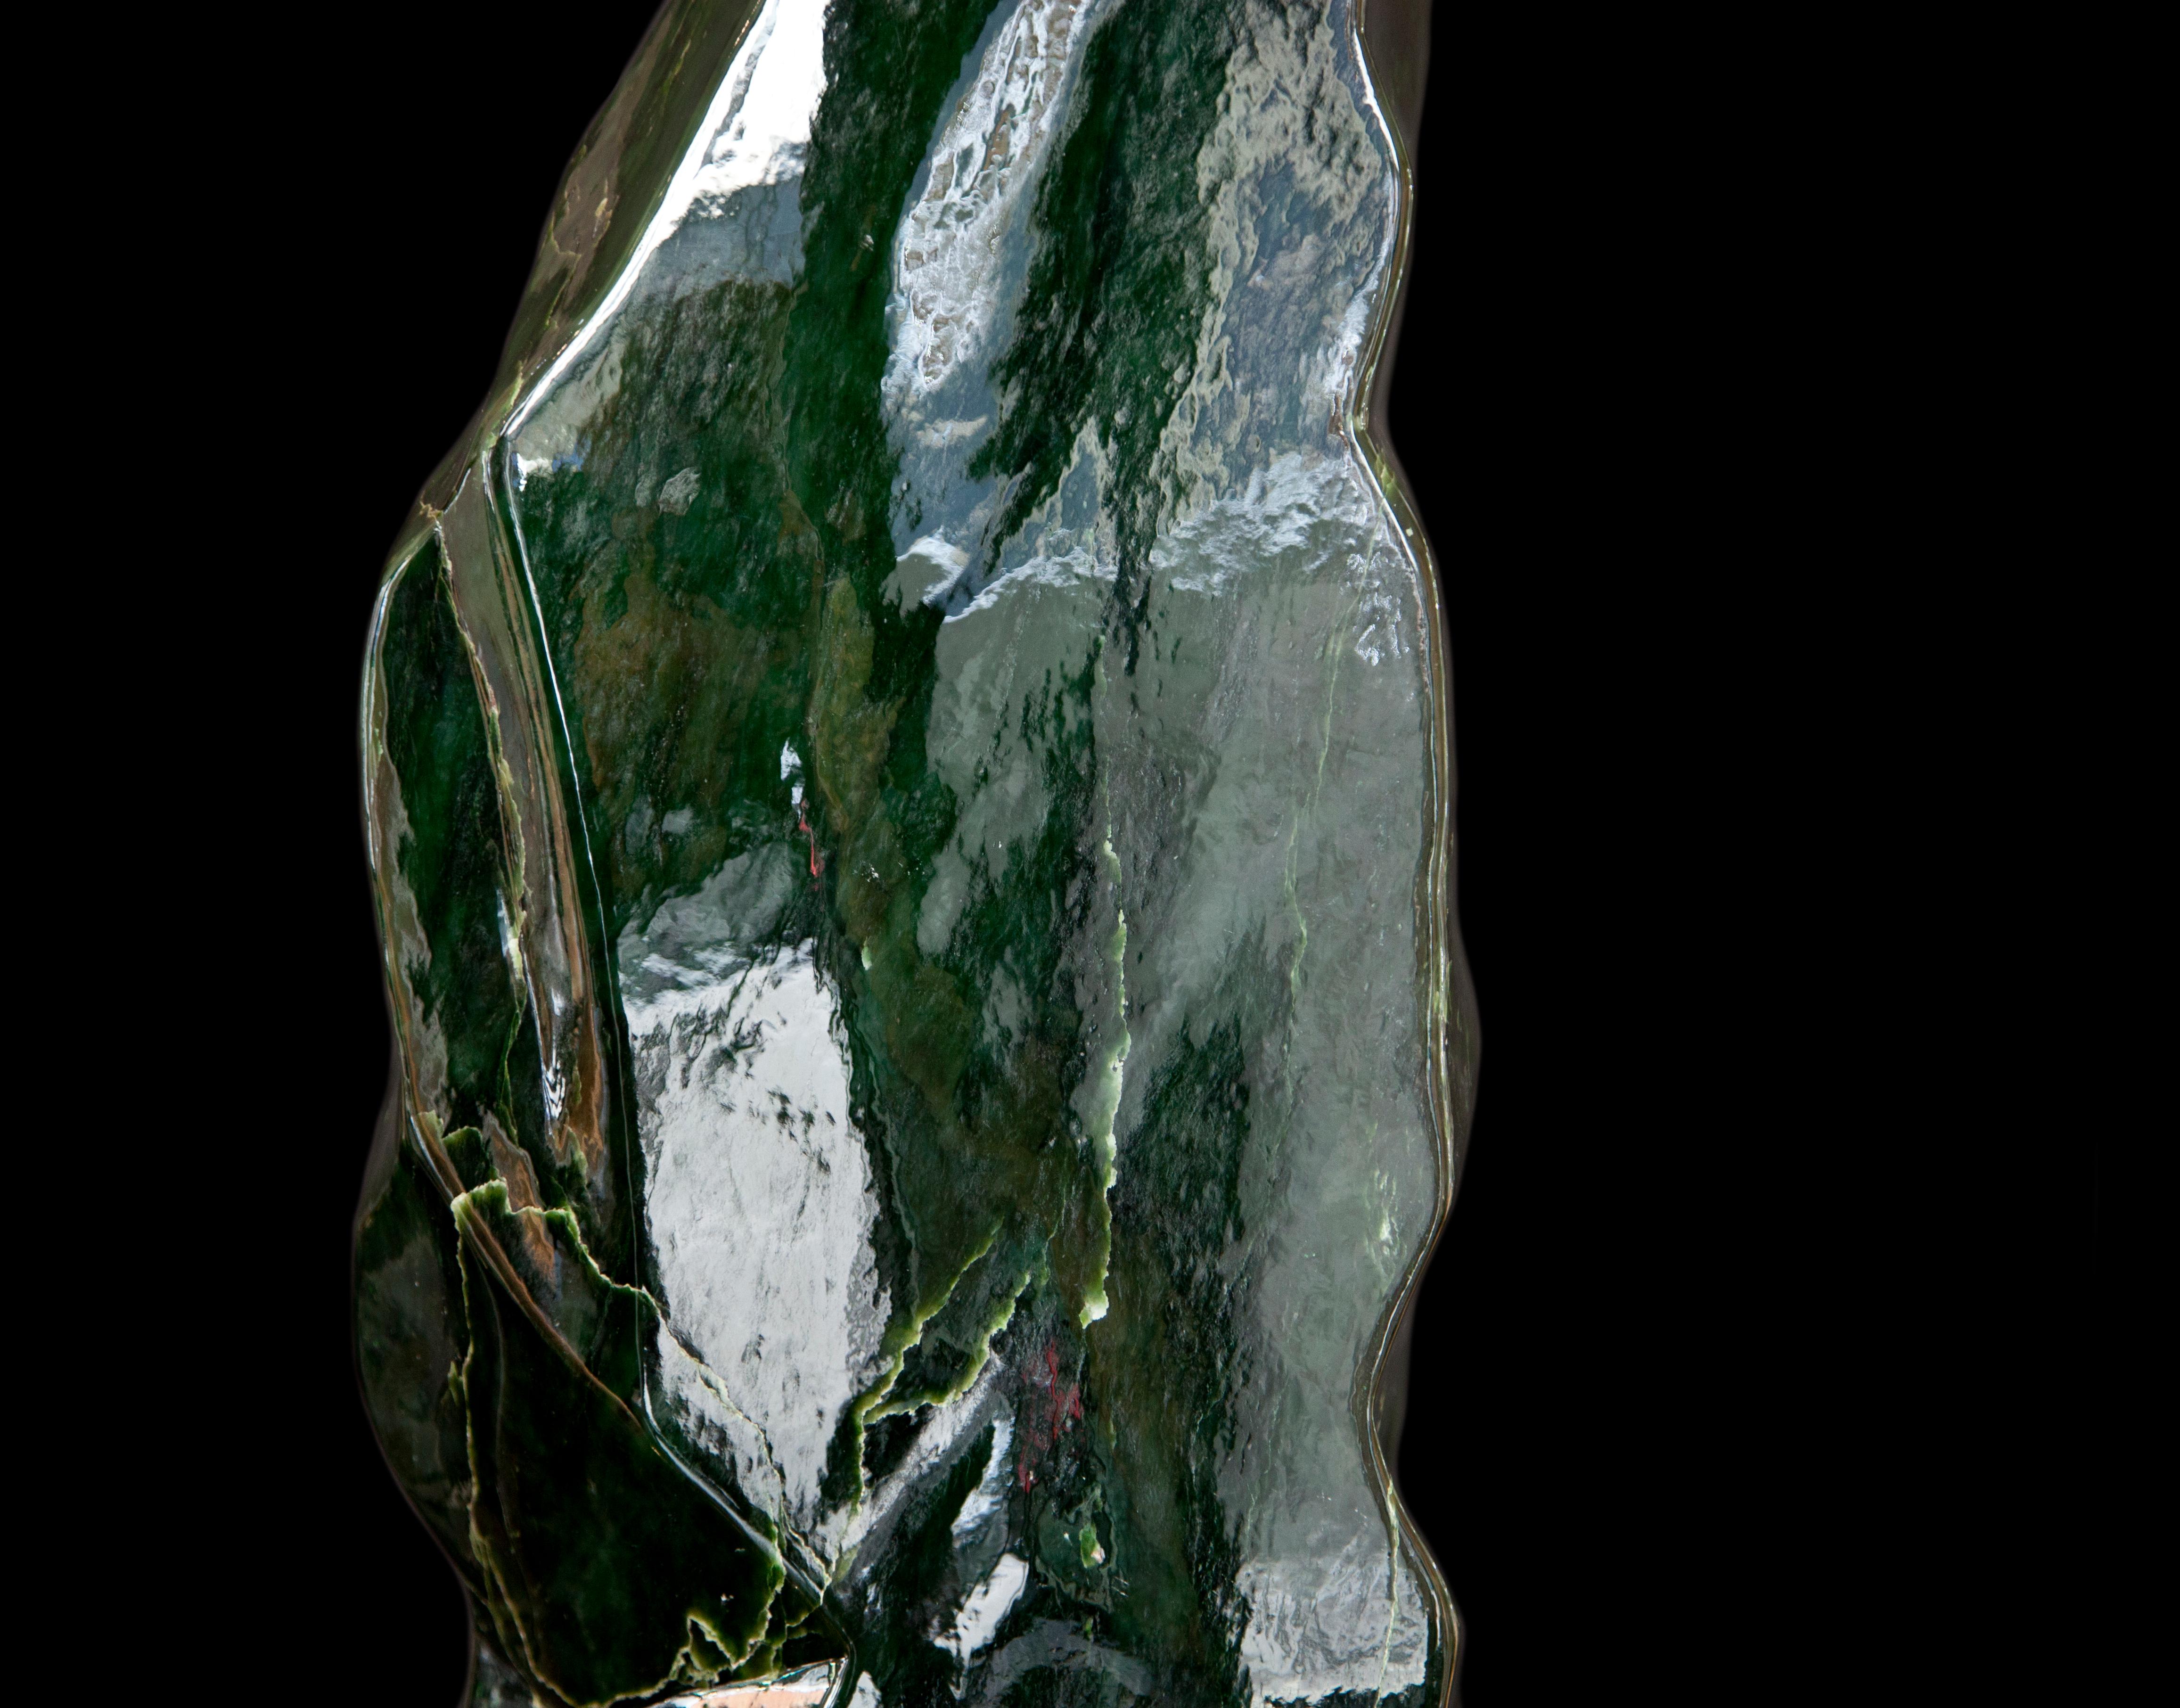 This magnificent piece of Nephrite Jade is currently one of the statement pieces in our showroom. Dark inky-green hues, smooth texture, sculpture-like shape and a colossal 70cm in height make it the perfect showpiece for any interior. It has a